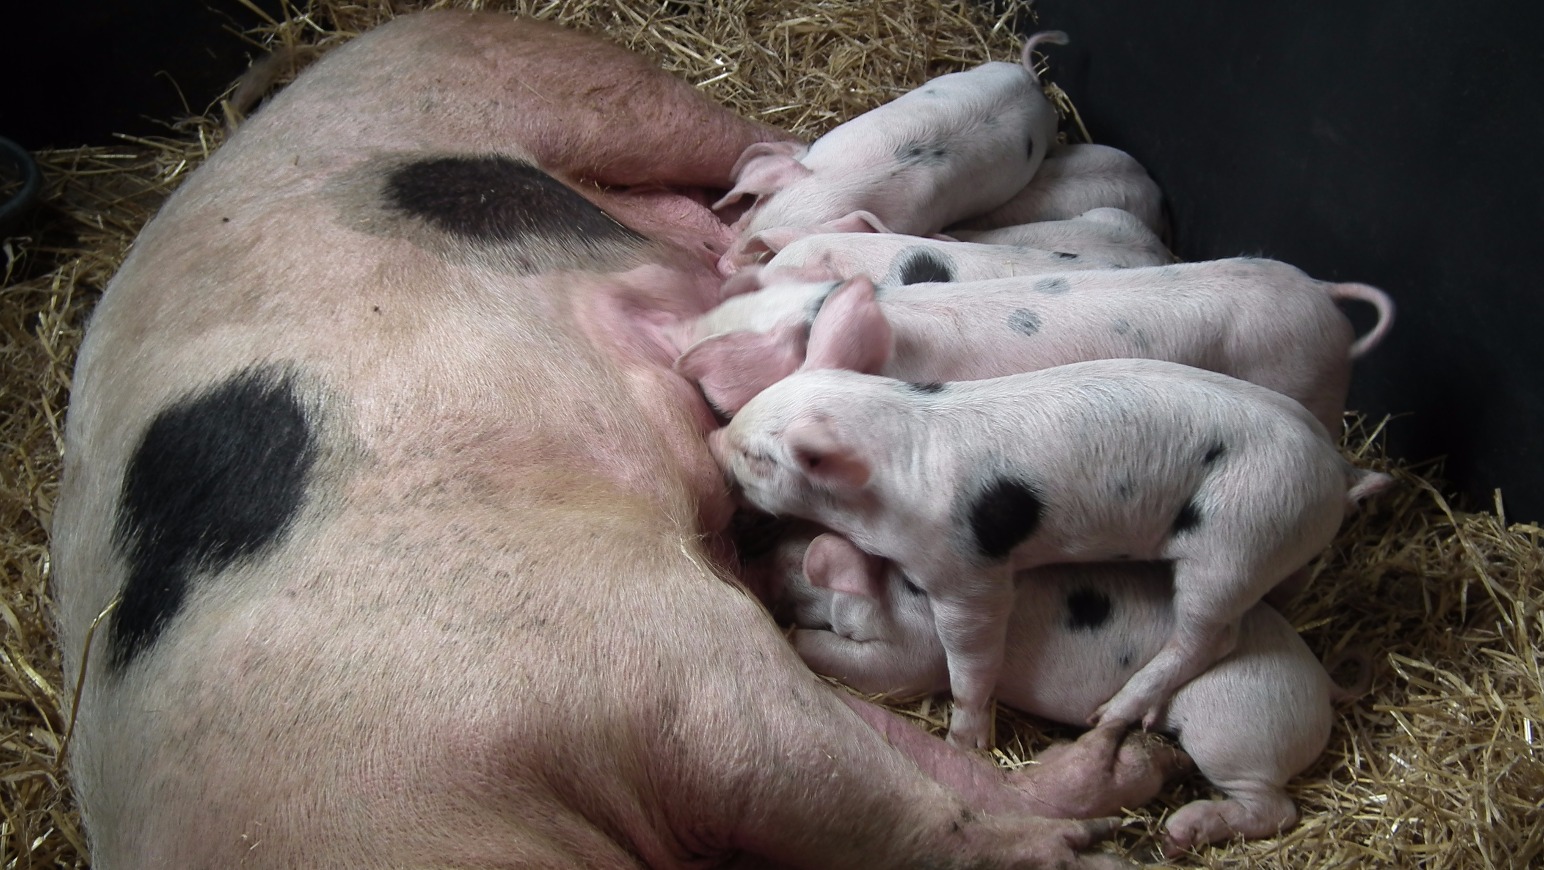 Piglets, Animal | Pig | Young | Baby | Piglets | Feed | Feeding | Milk | Mother | Farm